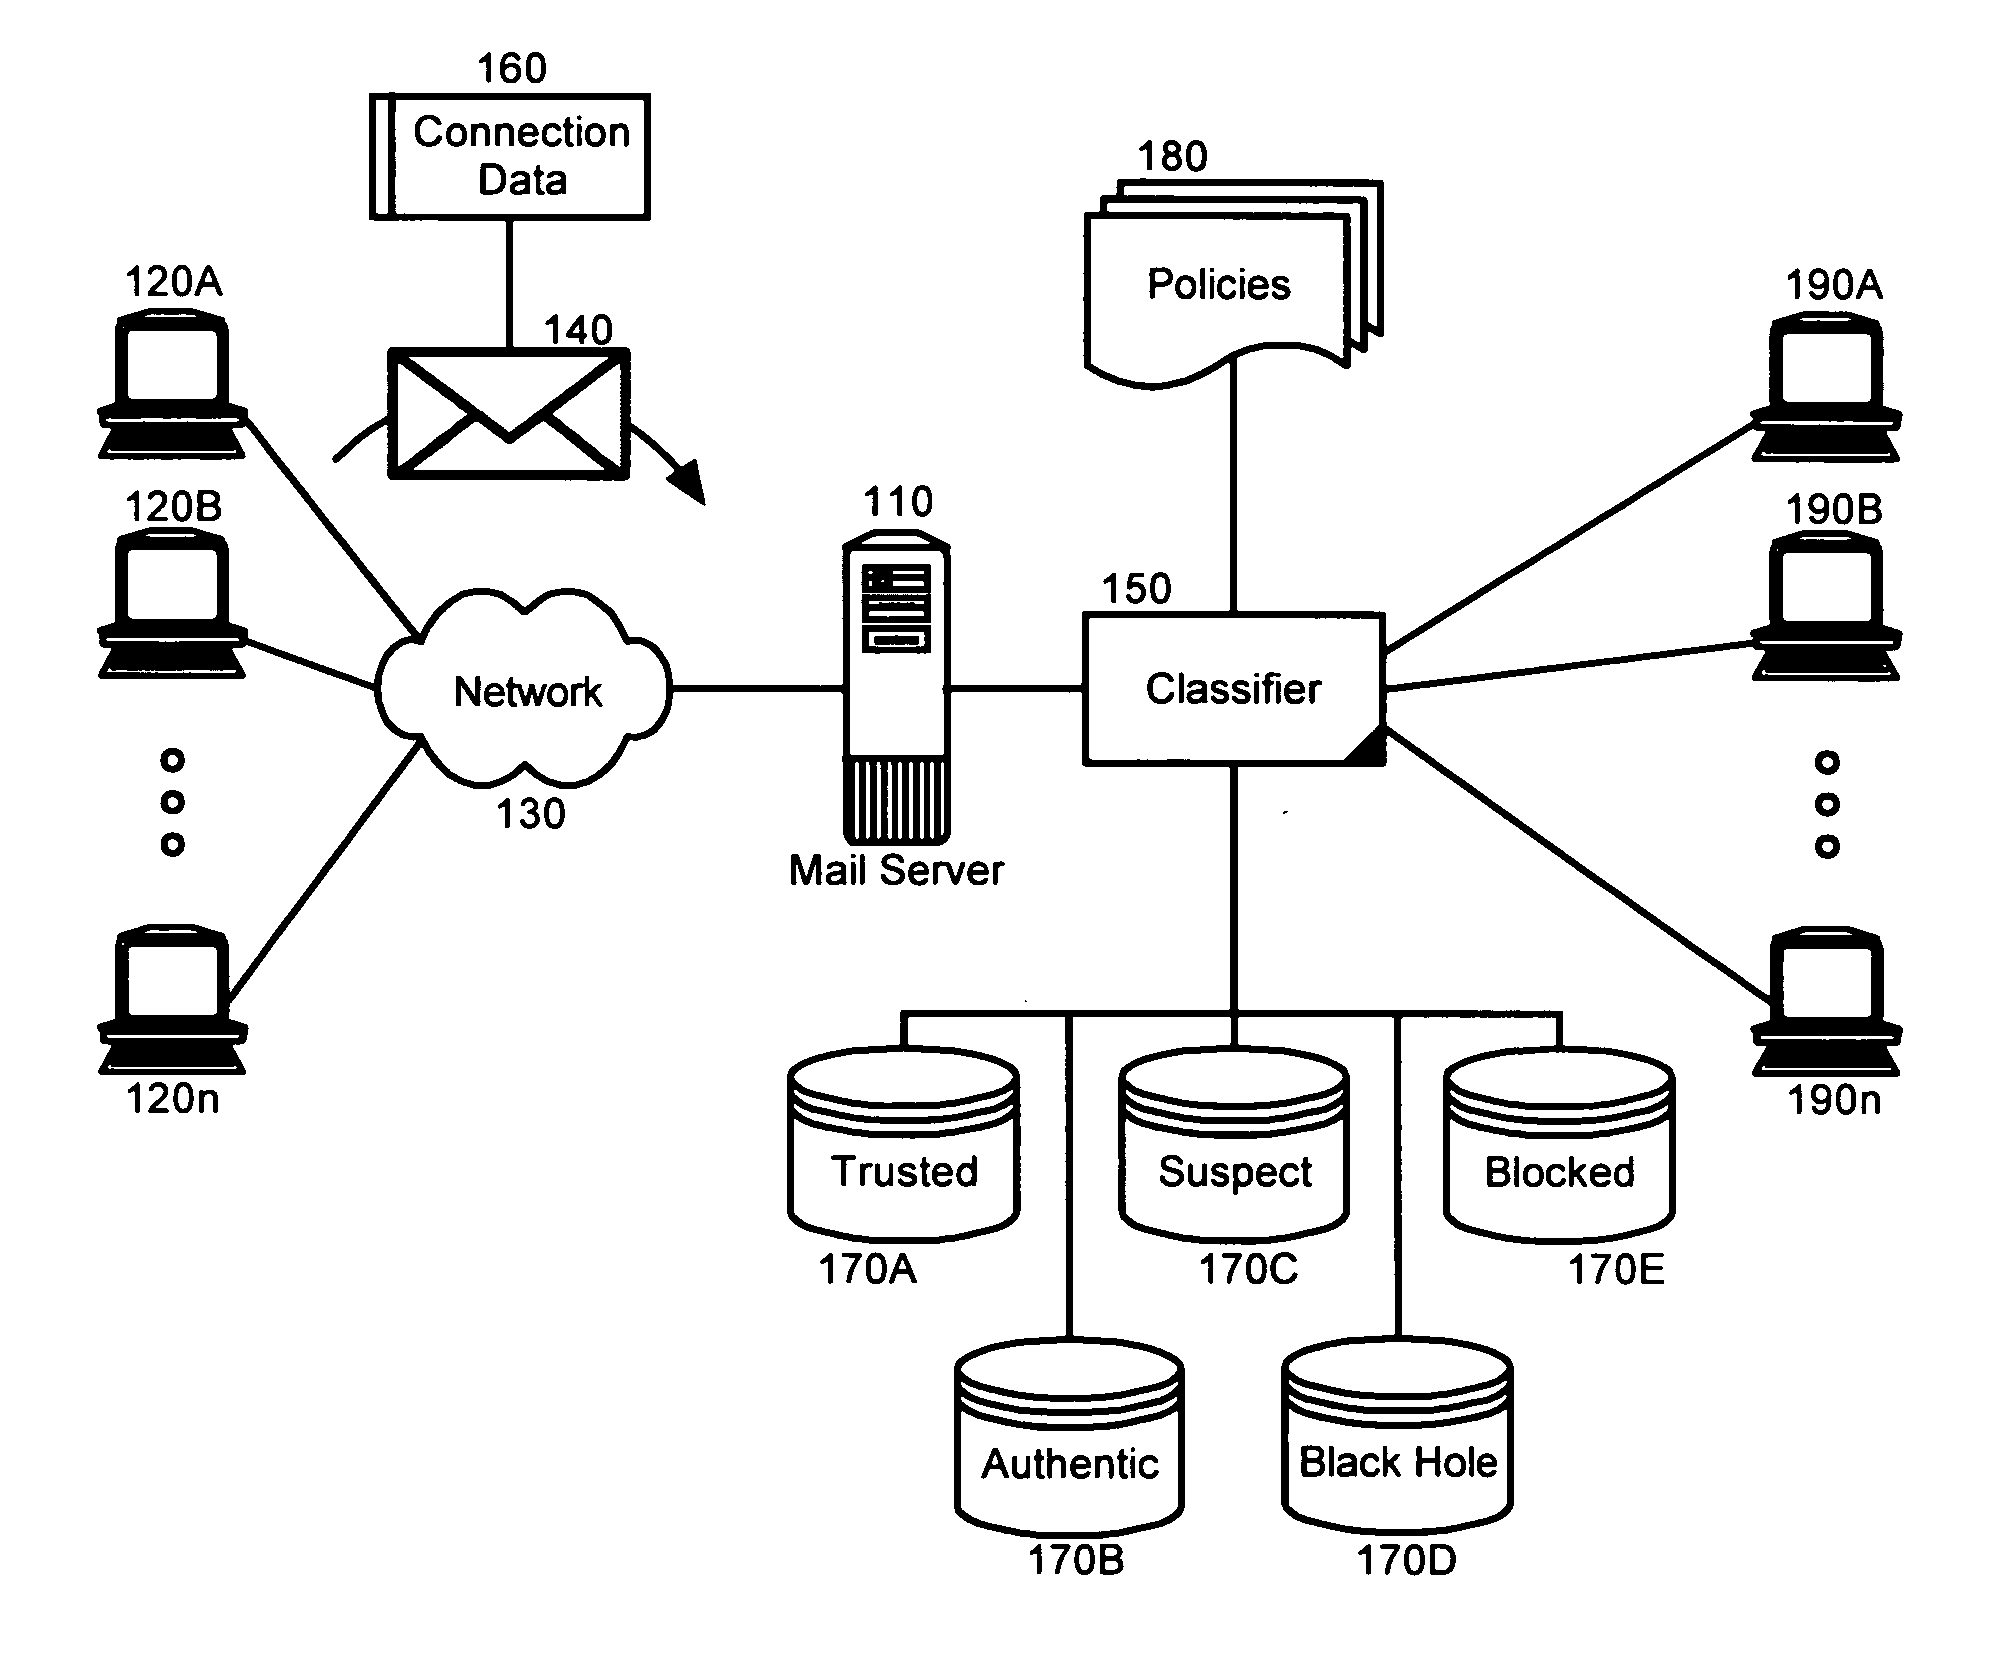 Classifying e-mail connections for policy enforcement